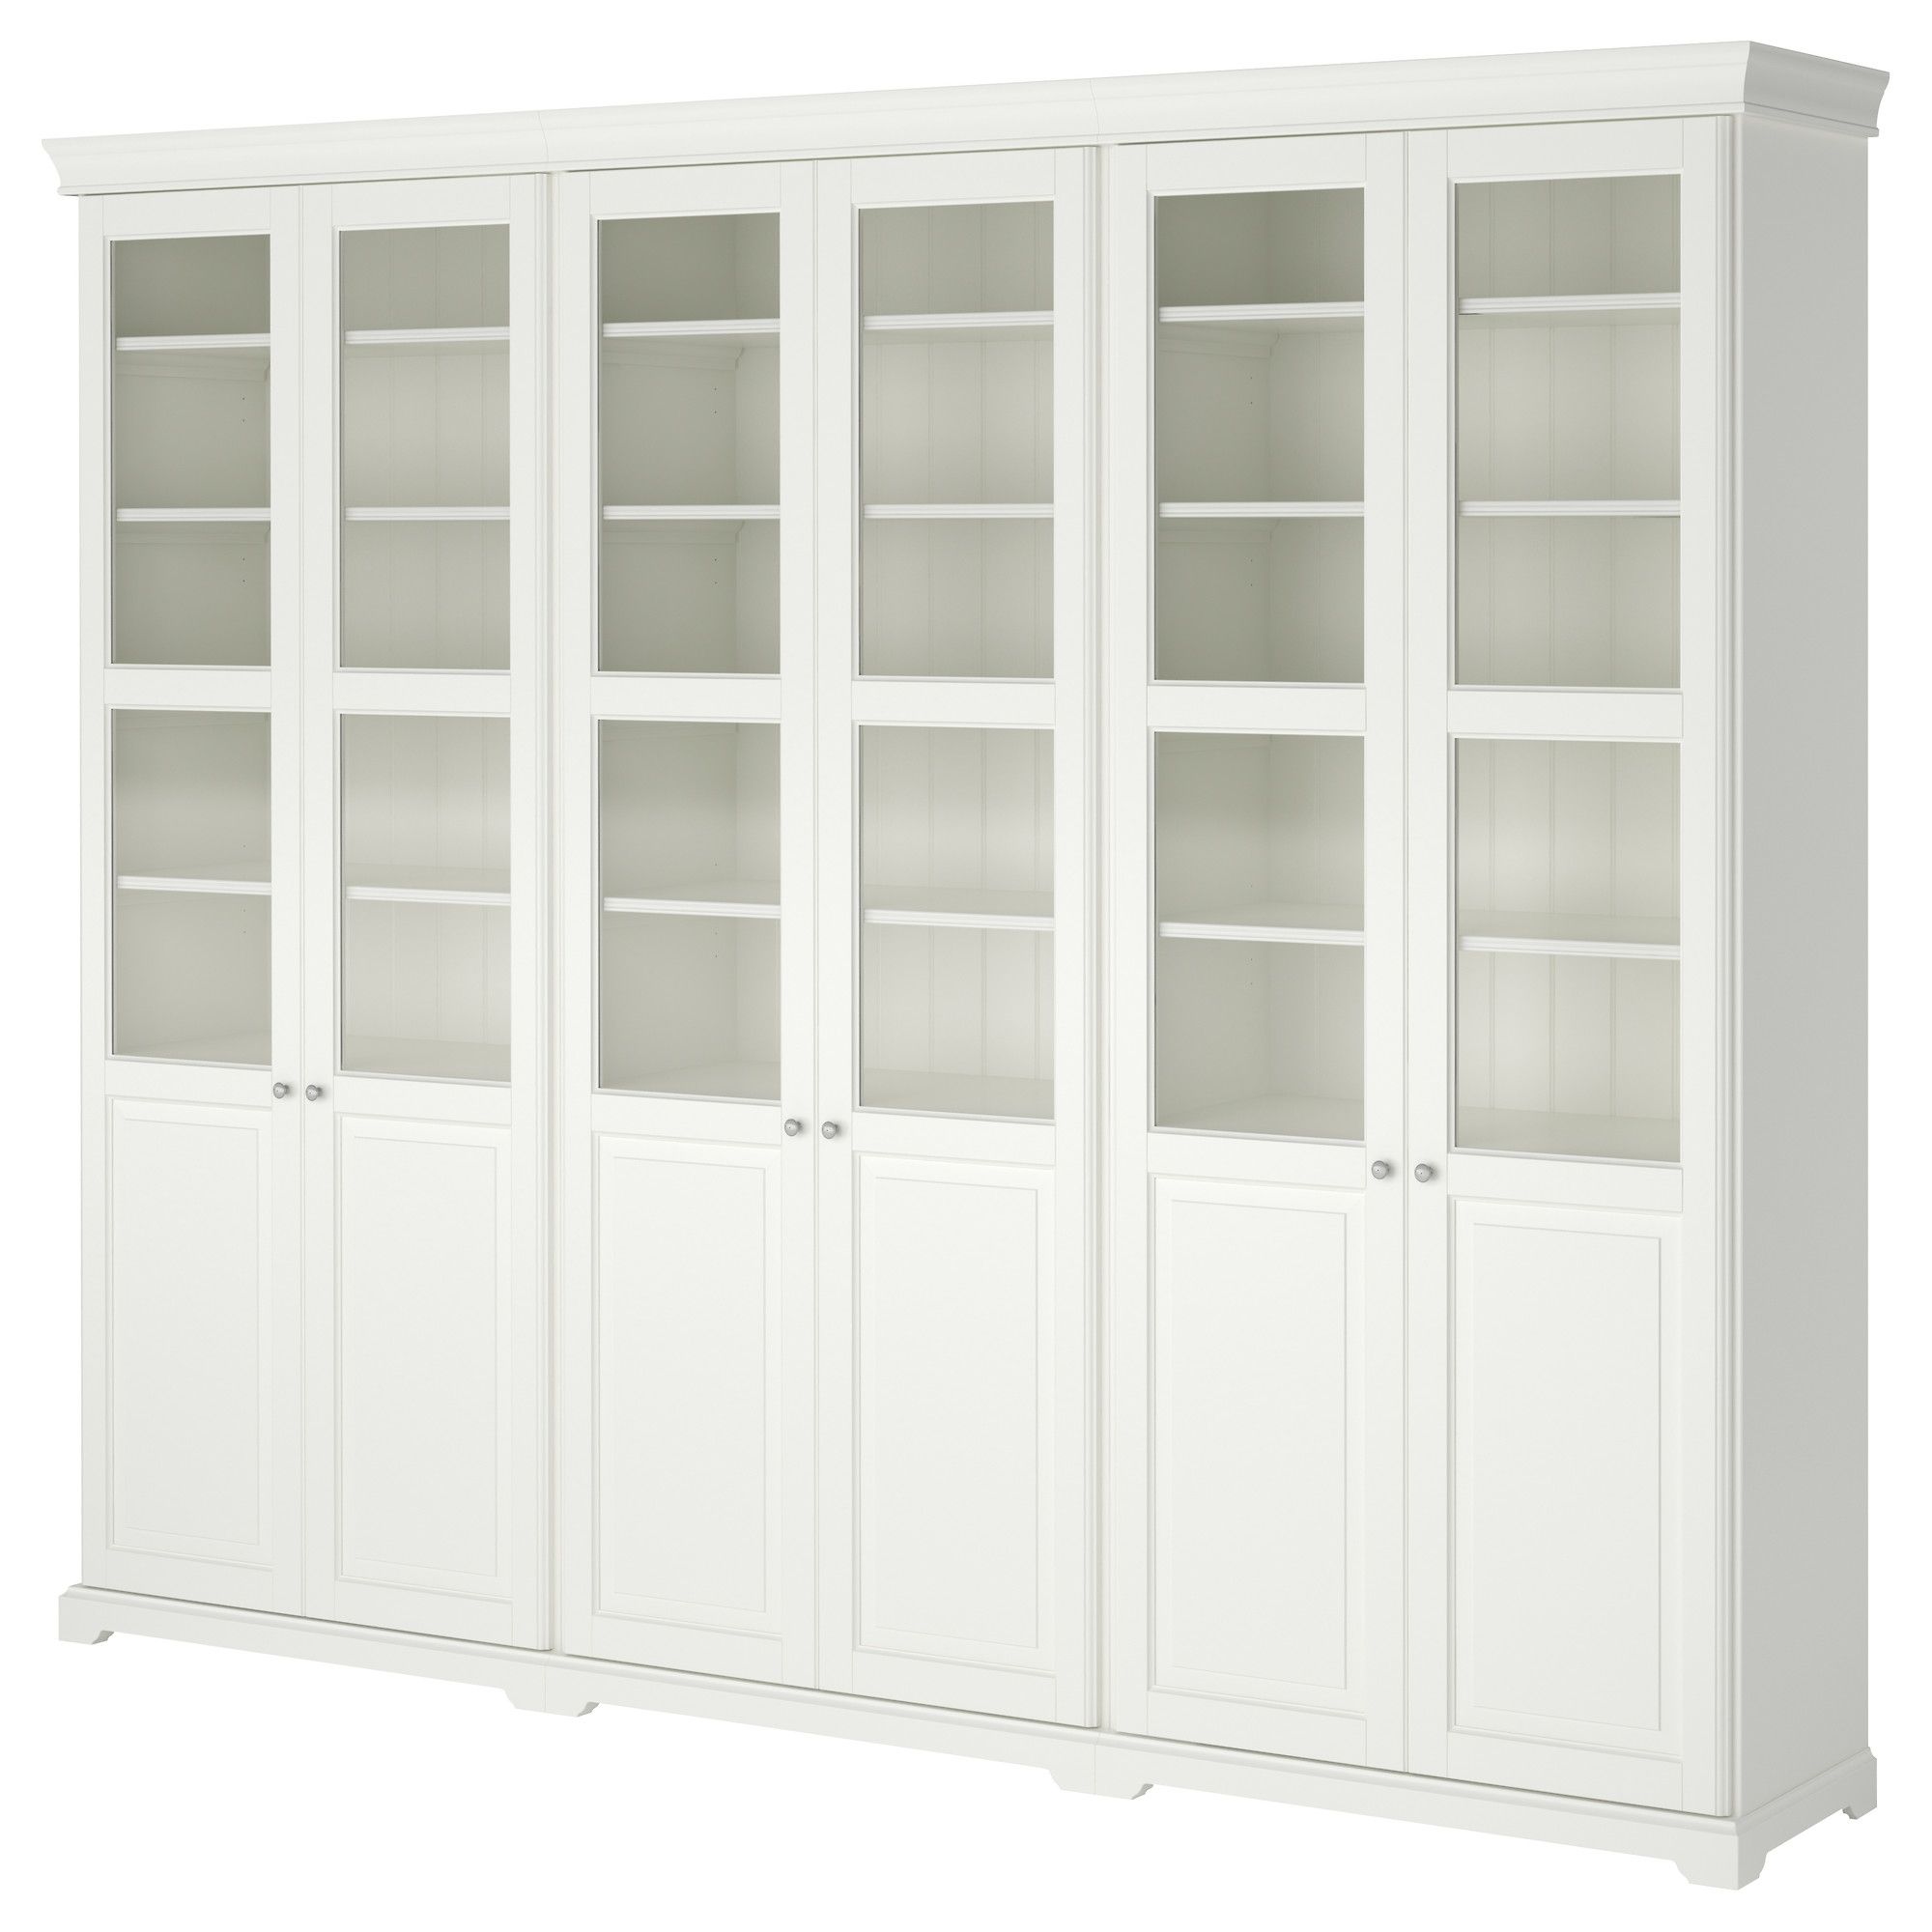 Bookcases Modern Traditional Ikea Within Bookcases With Doors (View 7 of 15)